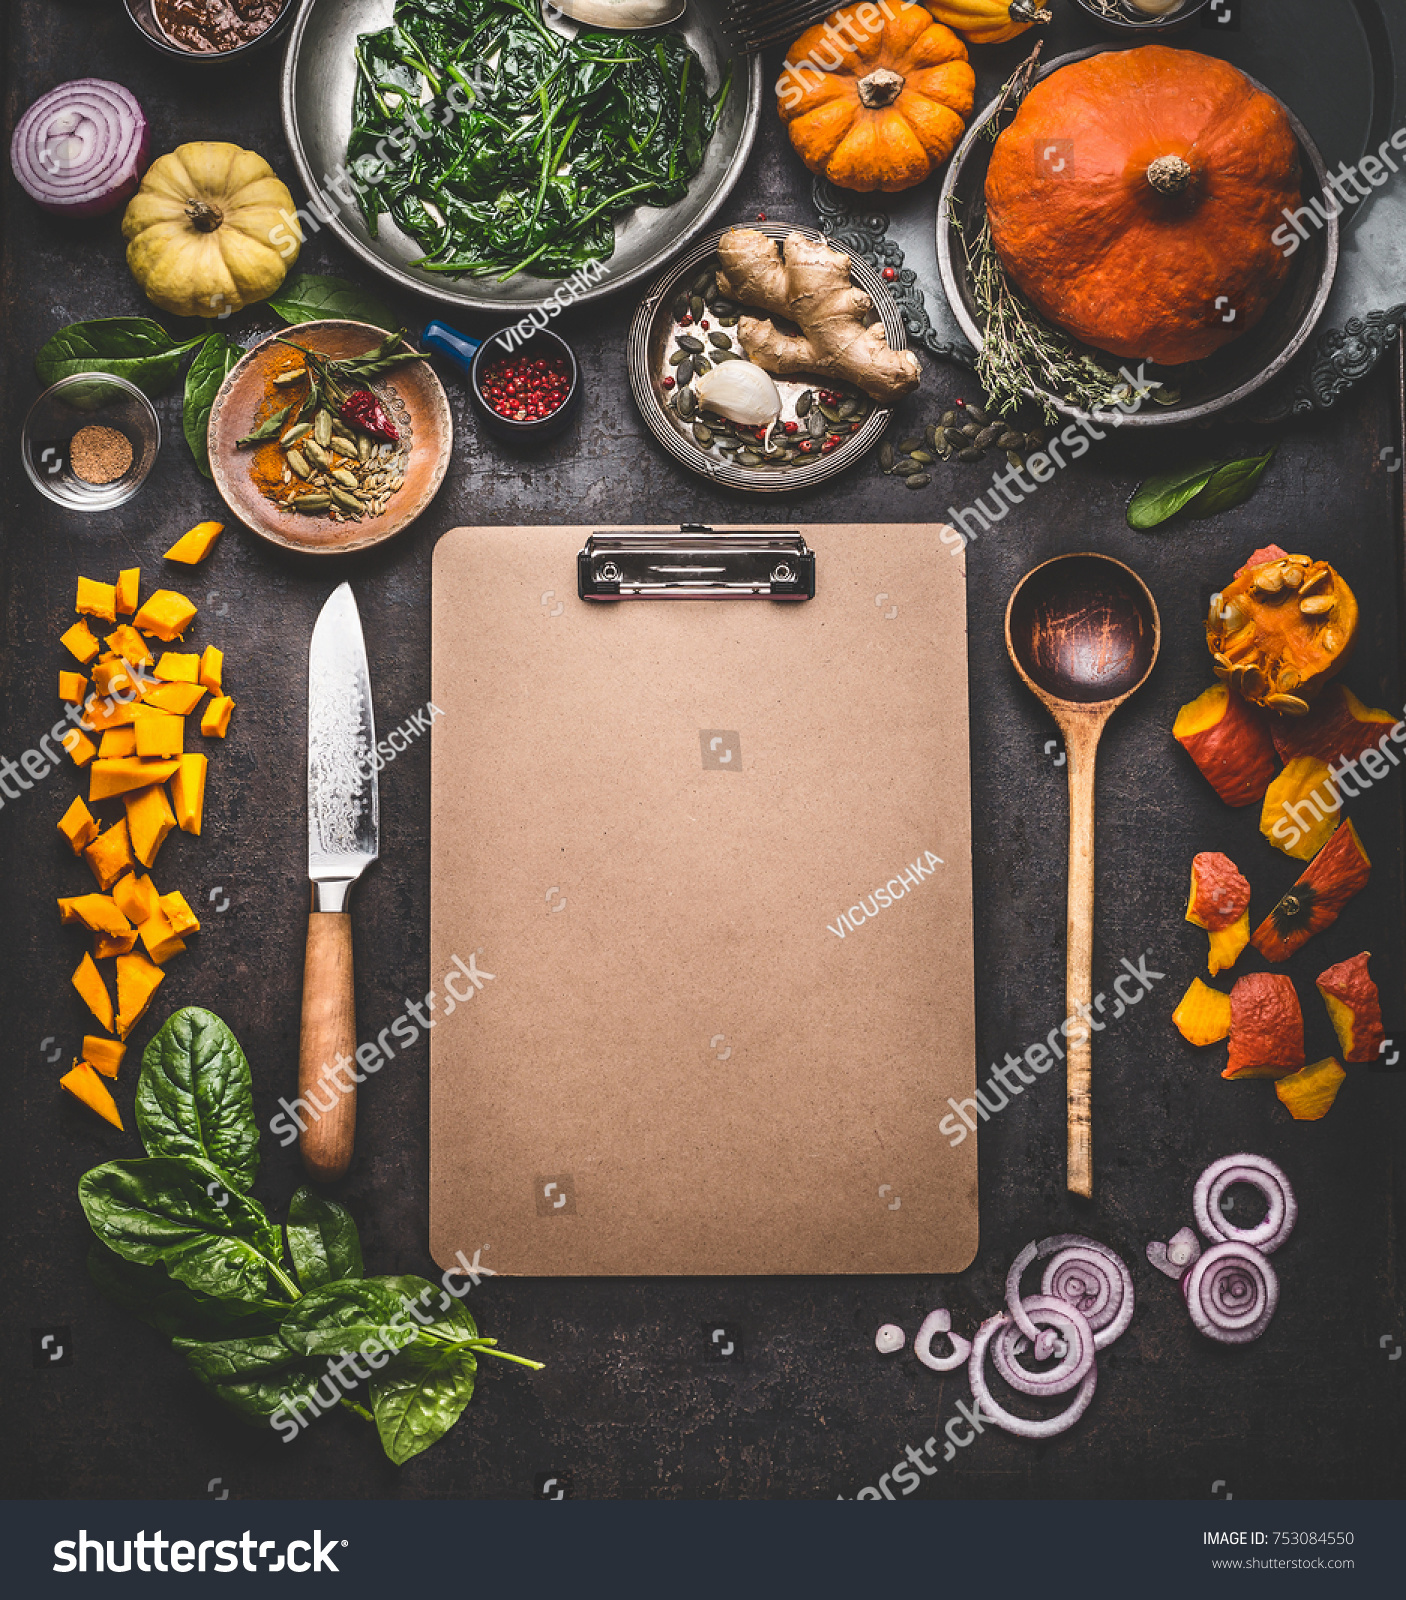 Food background for tasty winter and autumn dishes with pumpkin. Various cooking ingredients with spoon and knife around blank cardboard clipboard for menu or recipes , top view, frame, mock up #753084550